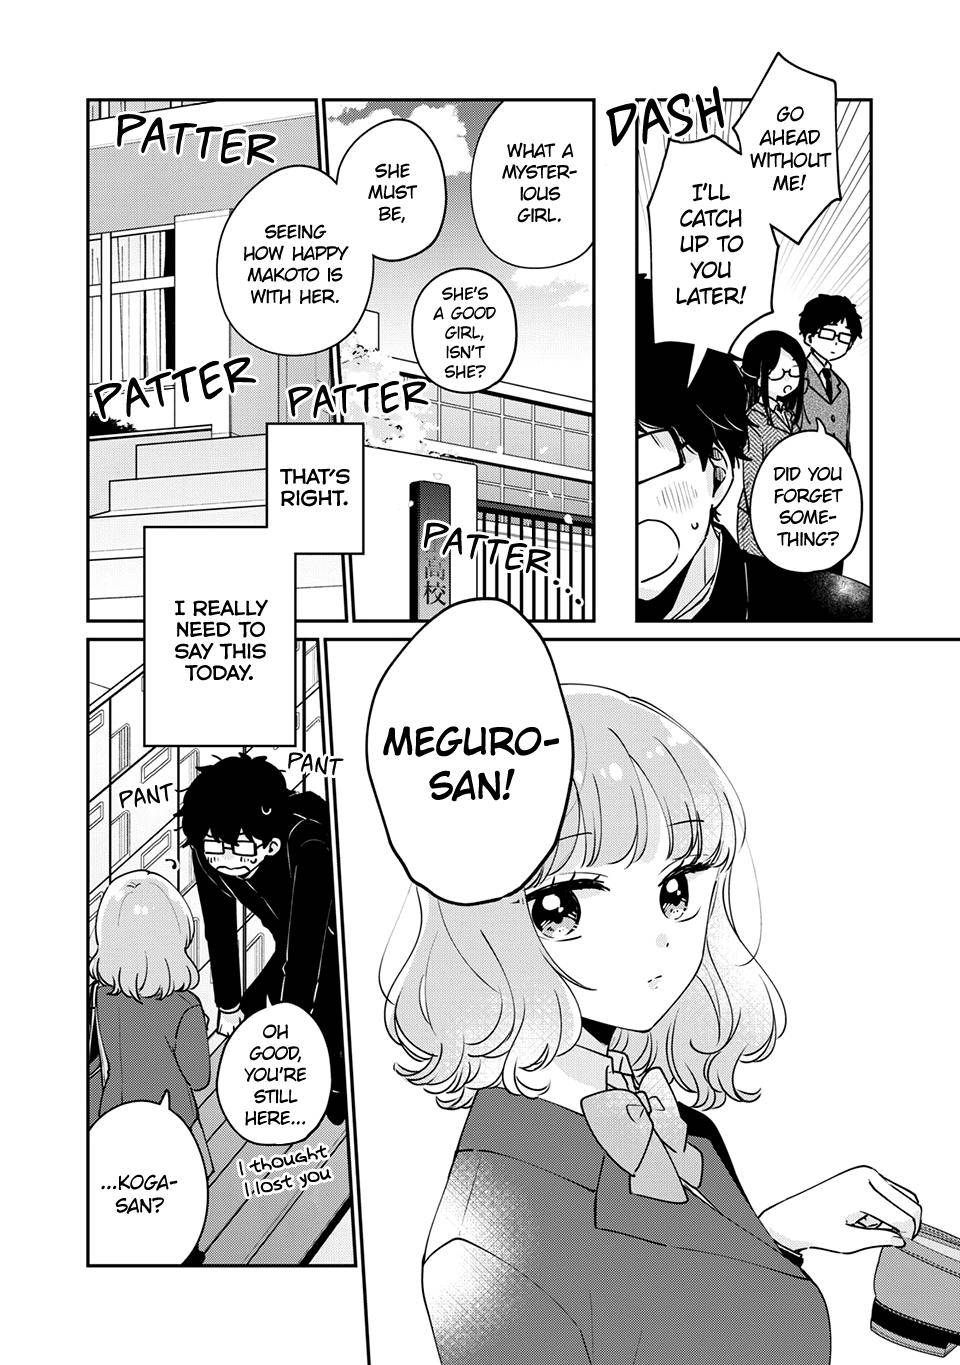 It's Not Meguro-san's First Time chapter 47 page 13